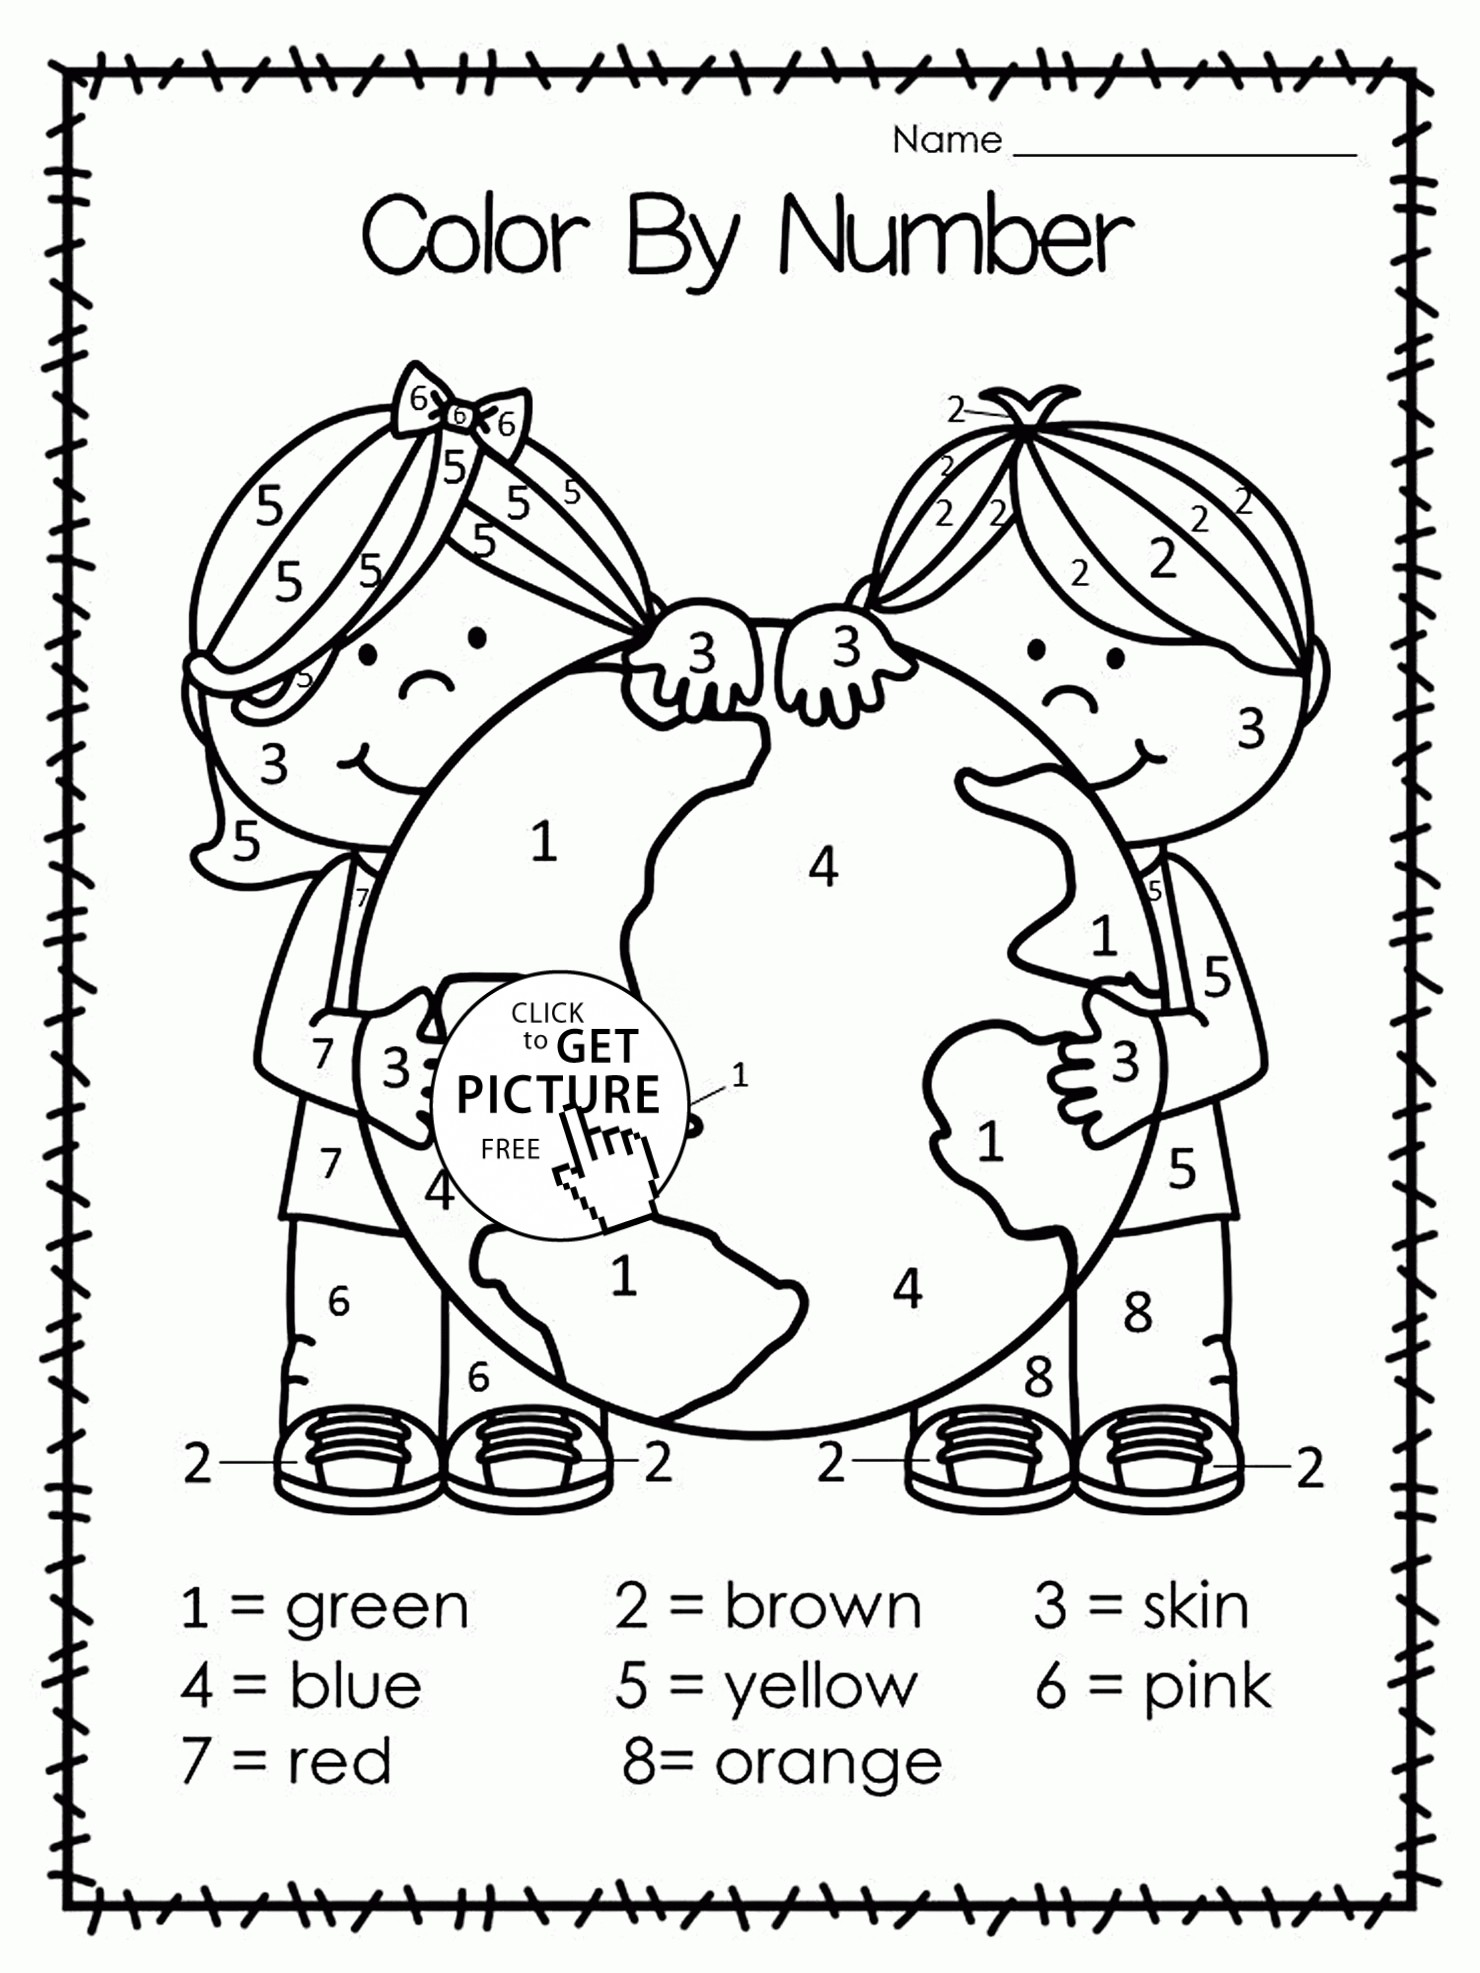 Free Printable Earth Day Coloring Pages And Activities Coloring Earth Day Coloring Sheets Stage Presents Sheet